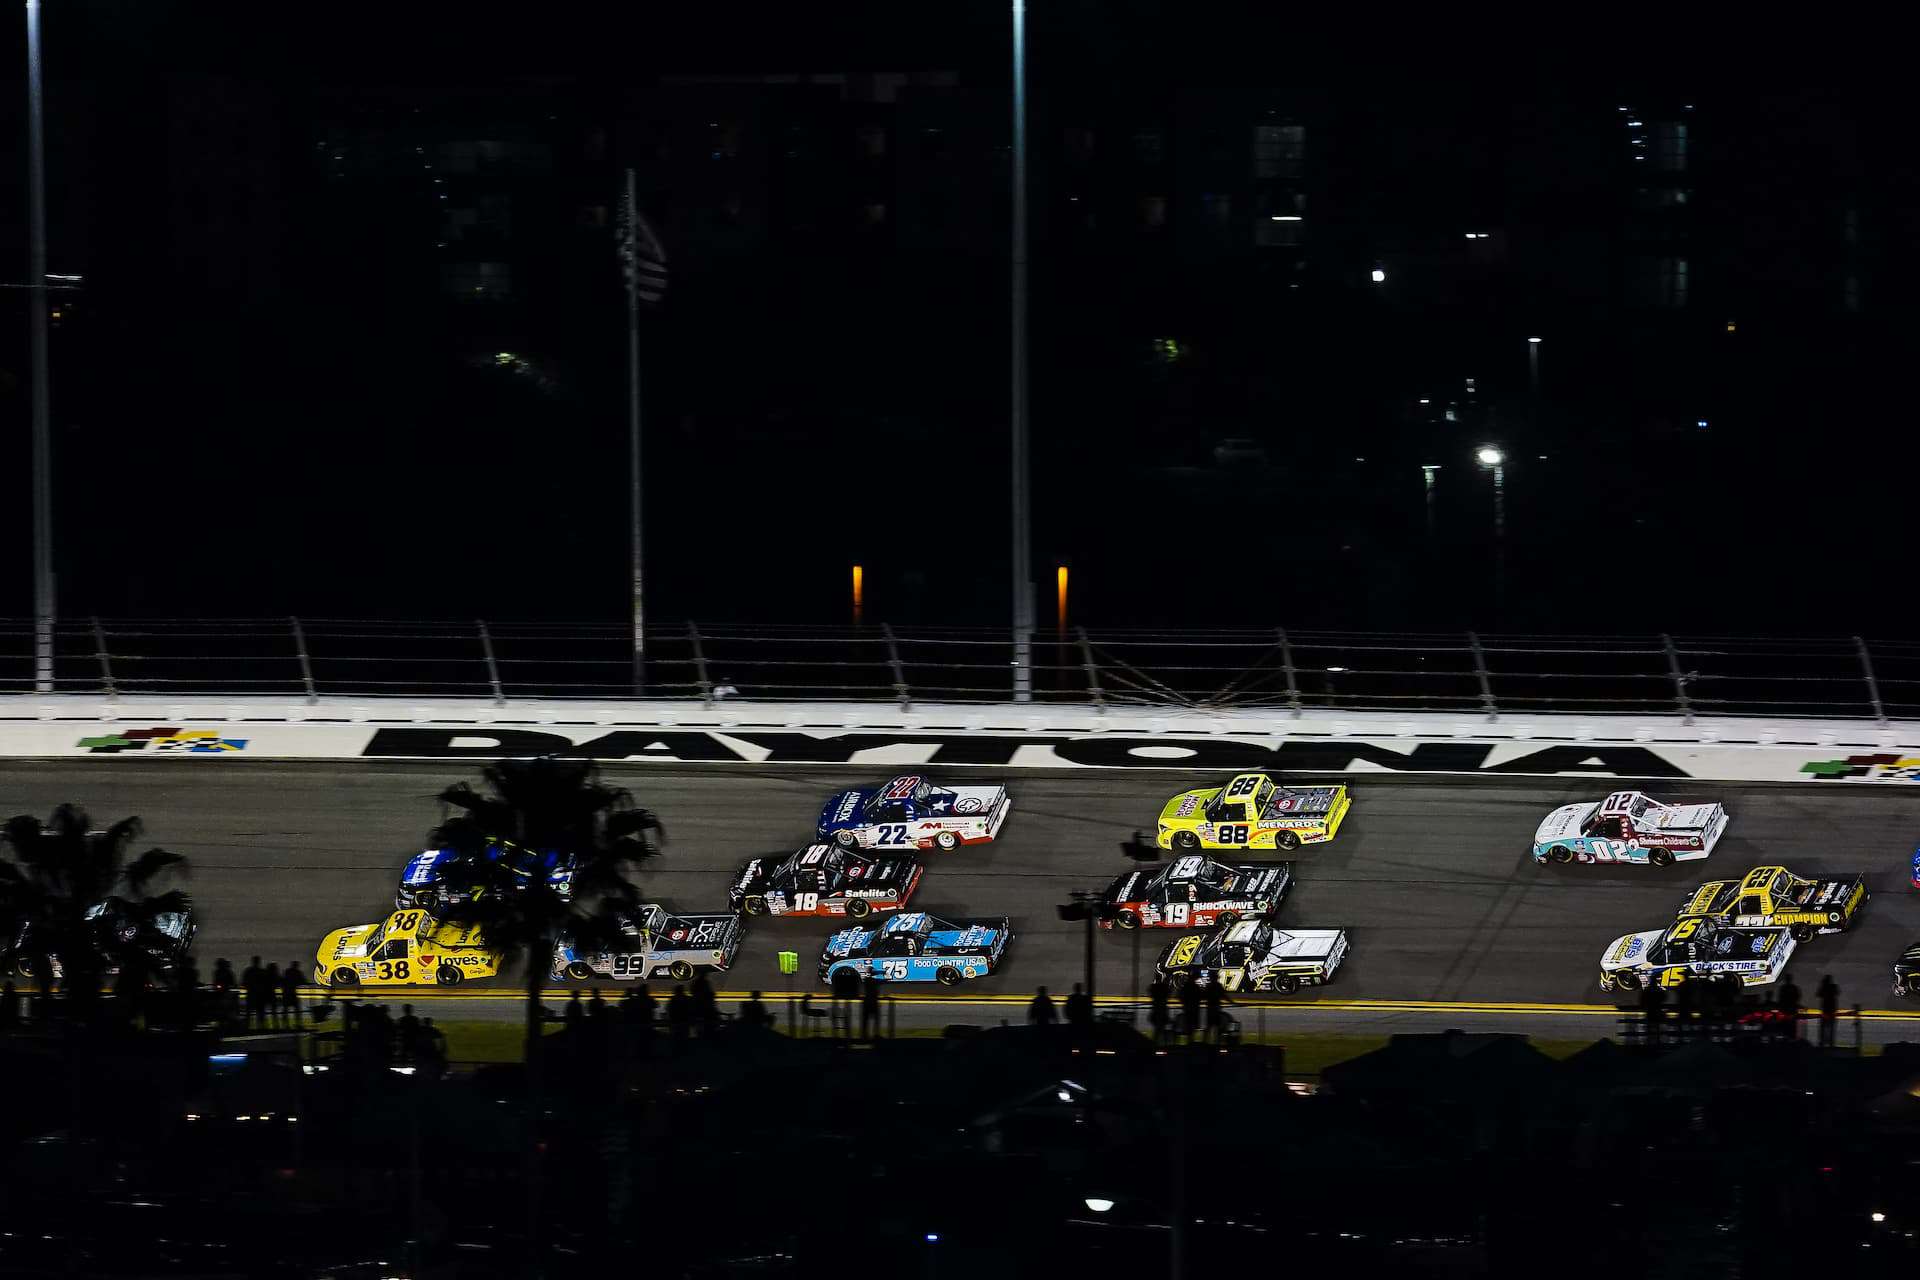 Austin Wayne Self starts off the 2022 Camping World Truck Series season with a top-15 at Daytona International Speedway in the NextEra Energy Resources 250.